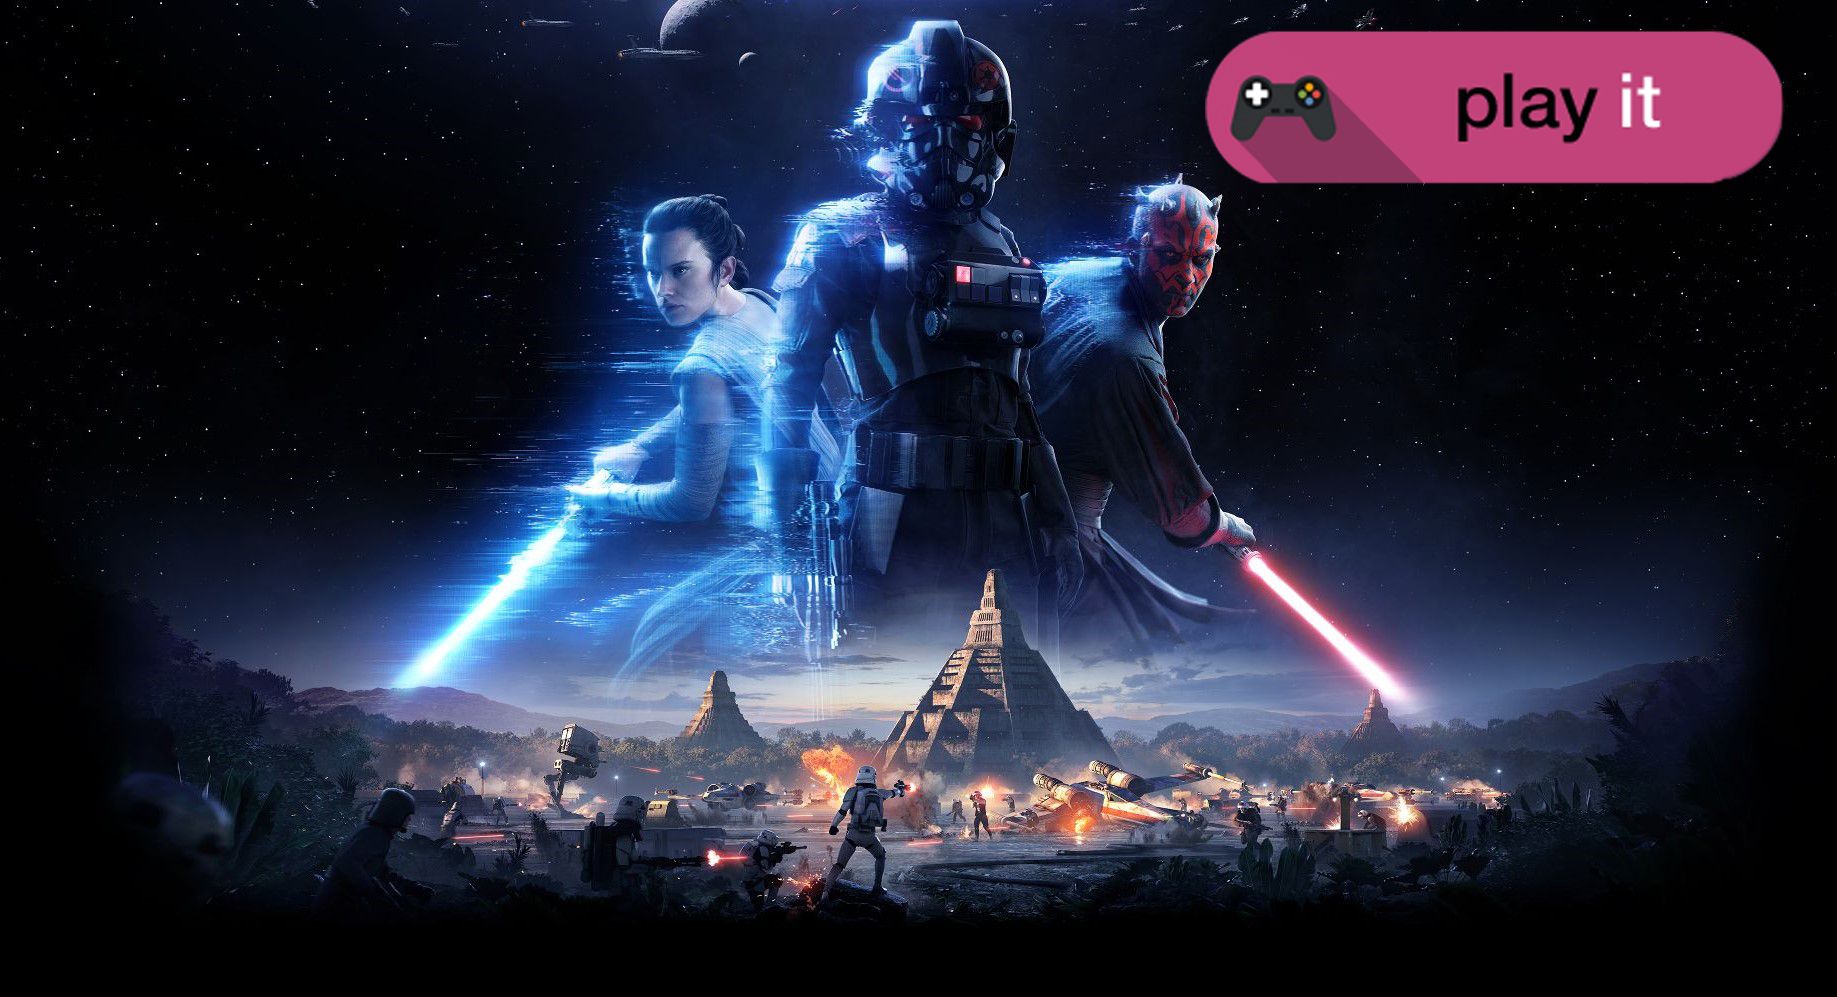 Star Wars Battlefront 2 review attack of the microtransactions TechRadar